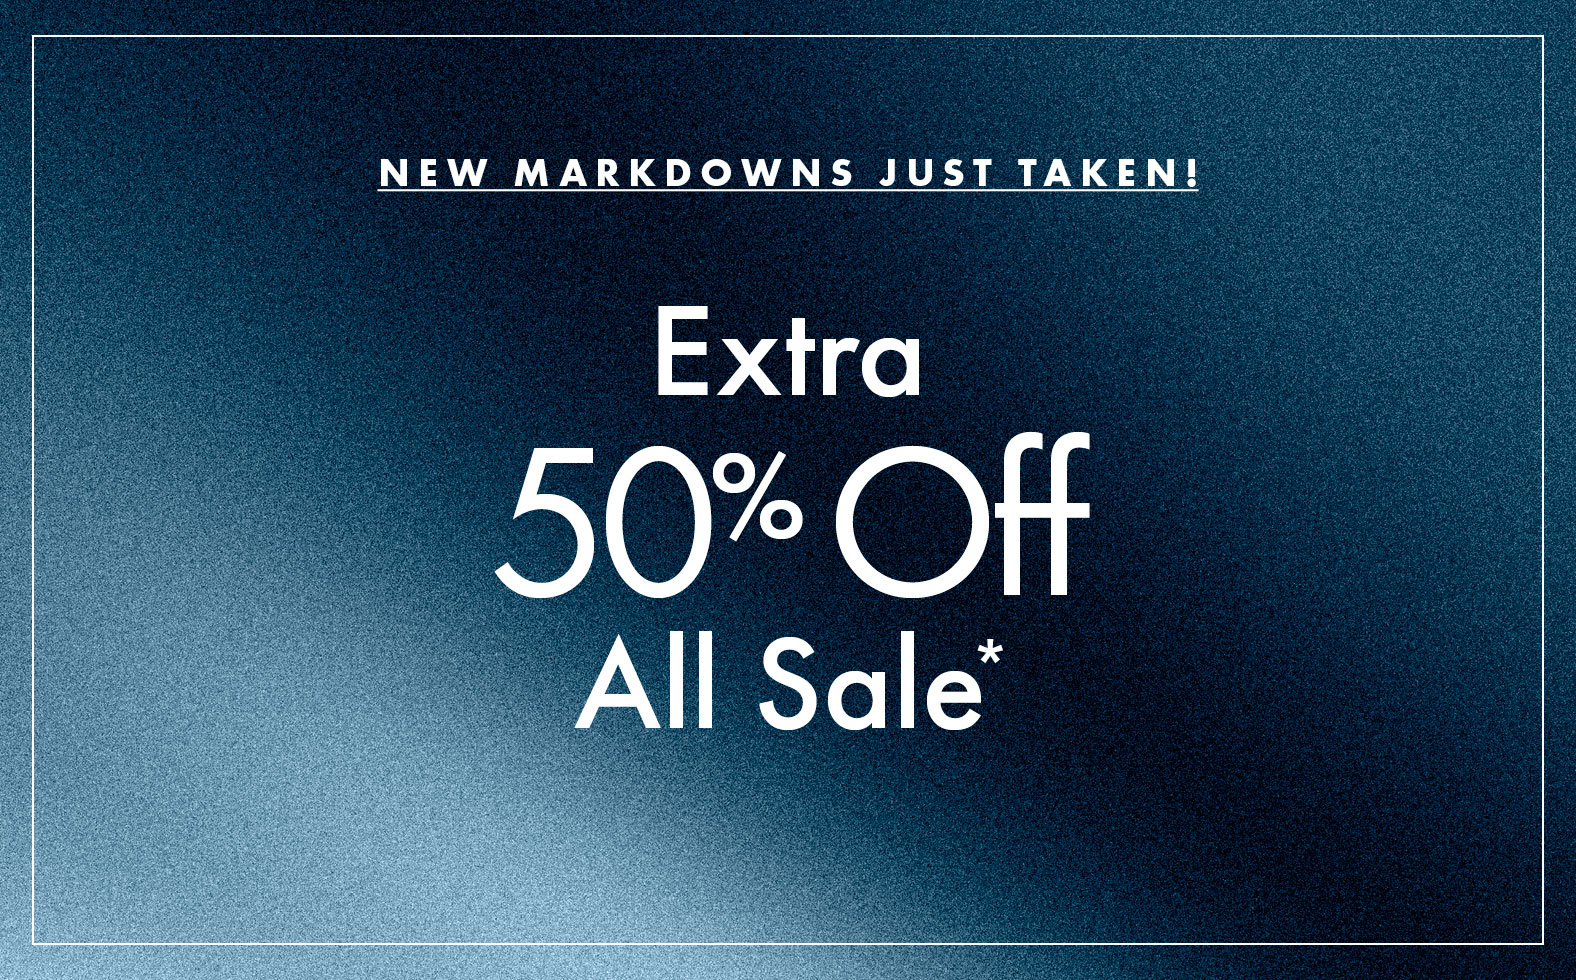 New Markdowns Just Taken! Extra 50% Off All Sale*